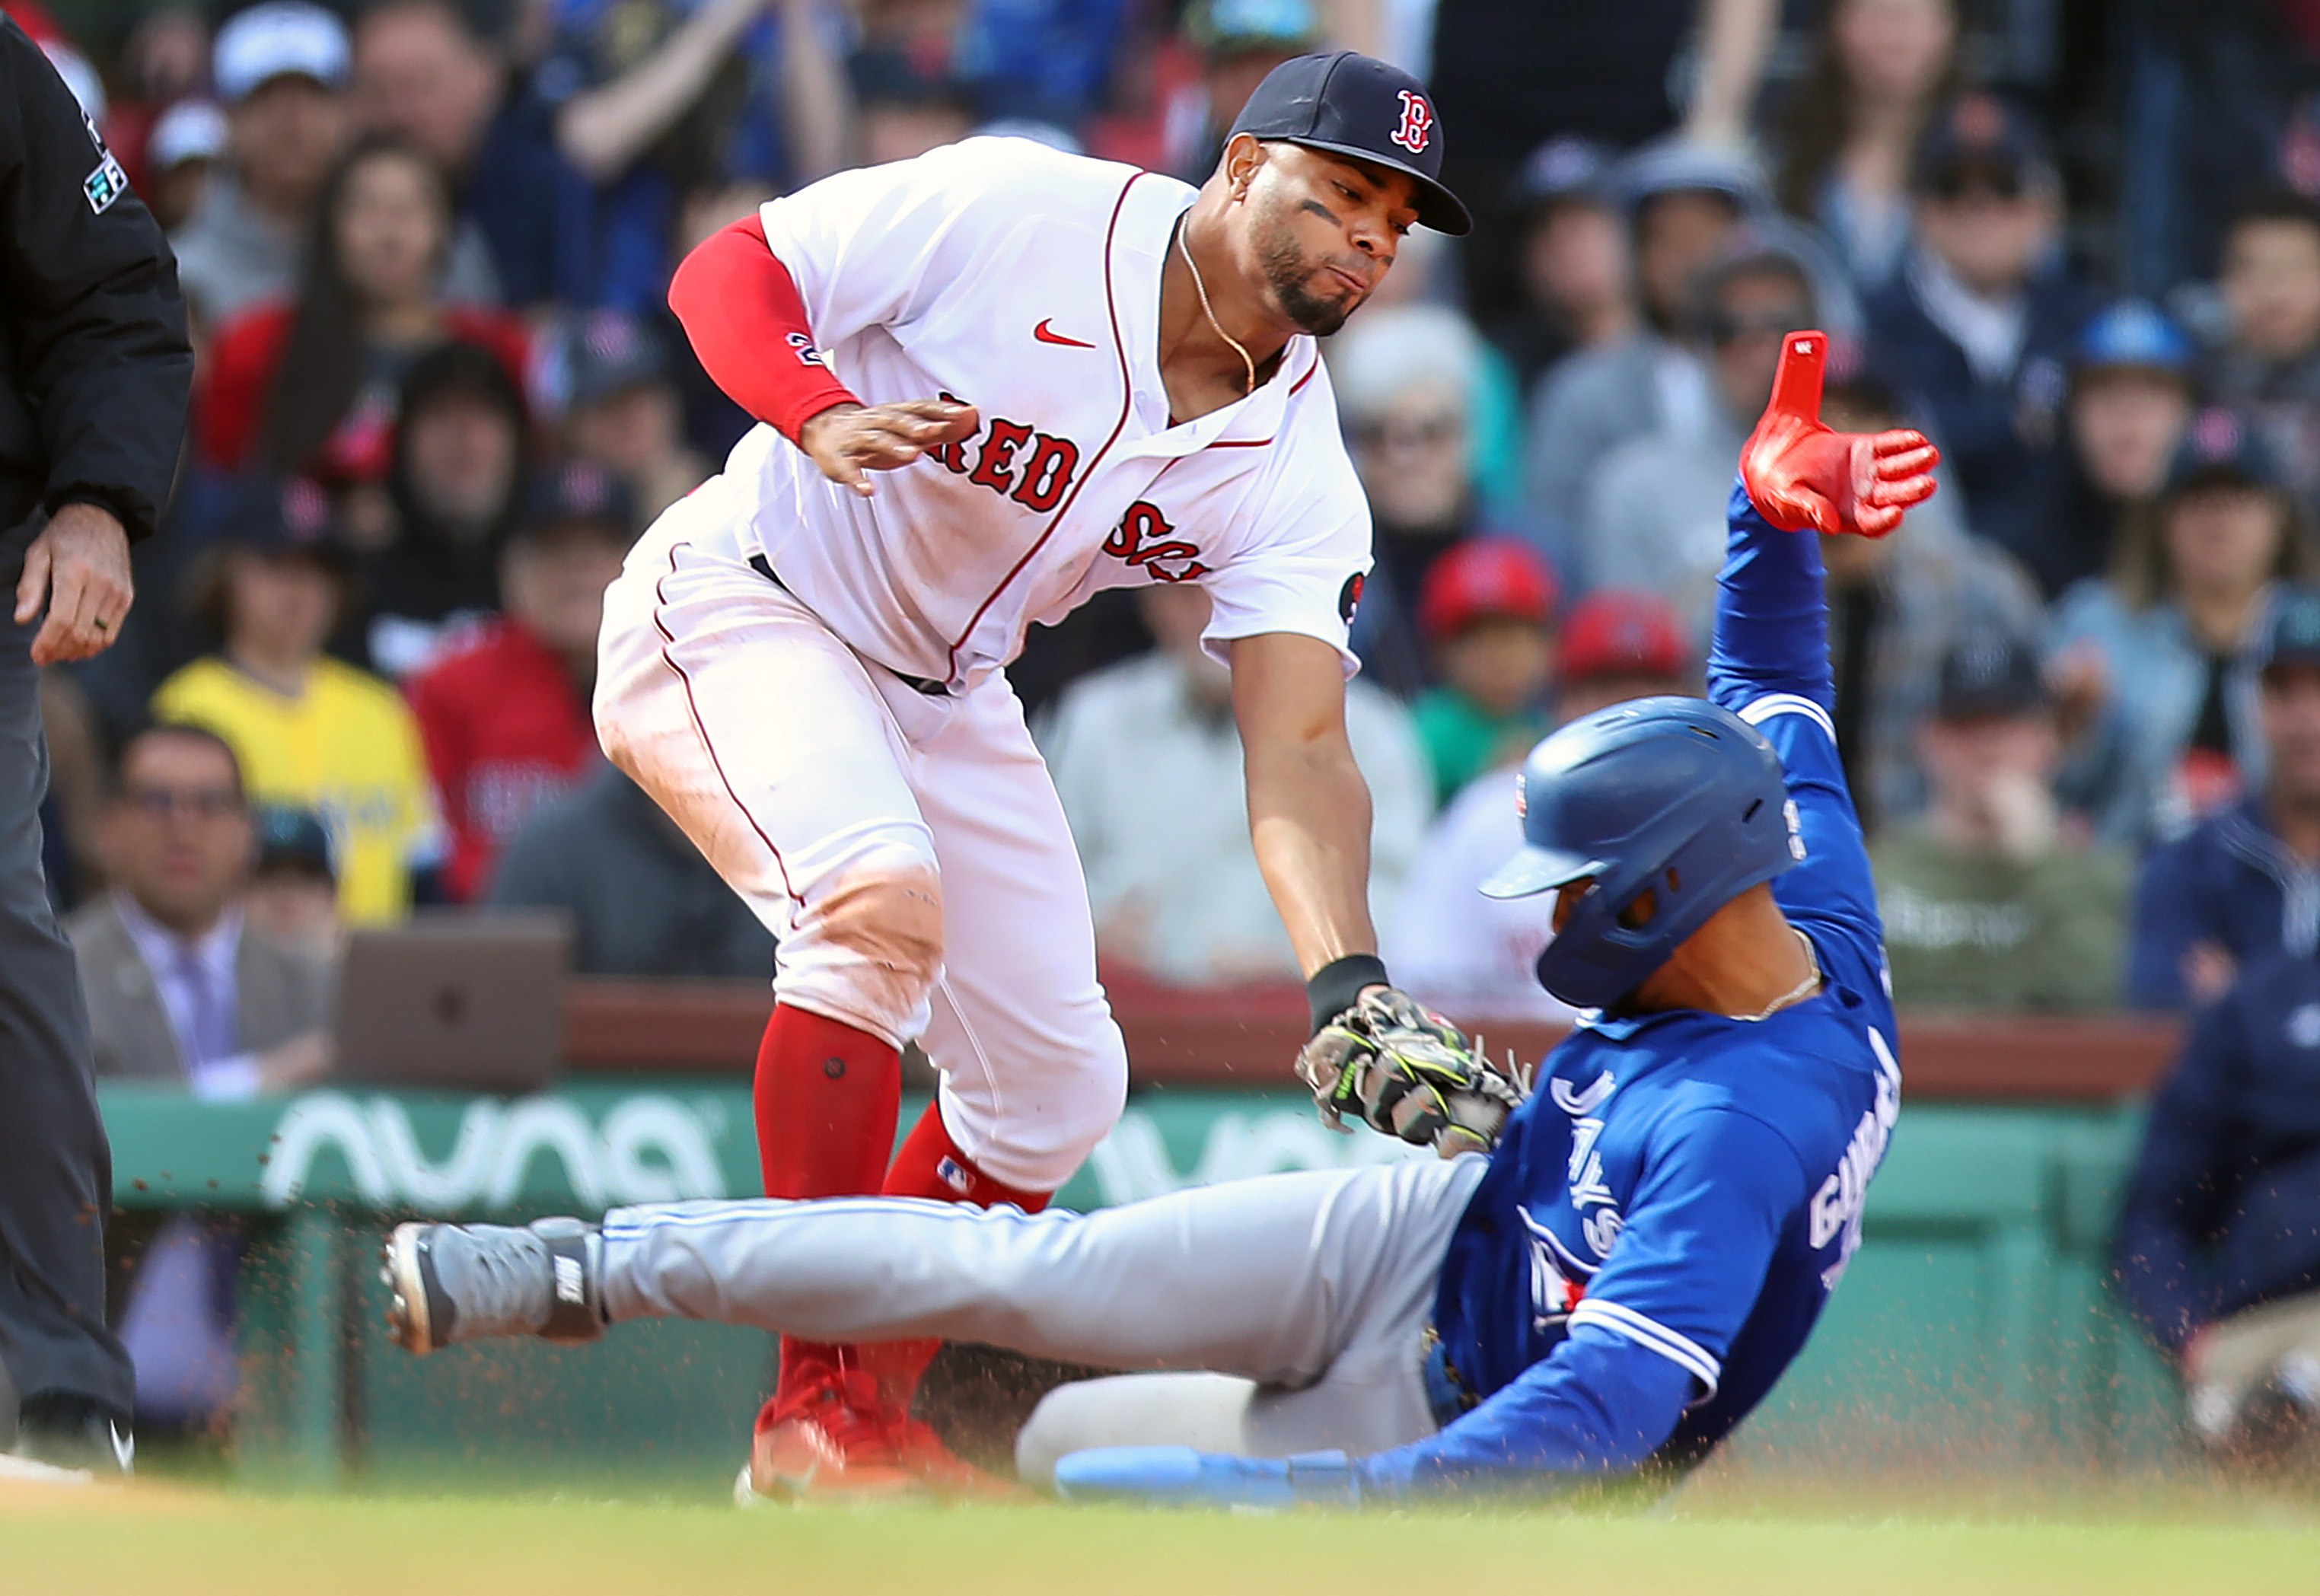 Boston Red Sox News: What's Being Done To Re-Sign Xander Bogaerts